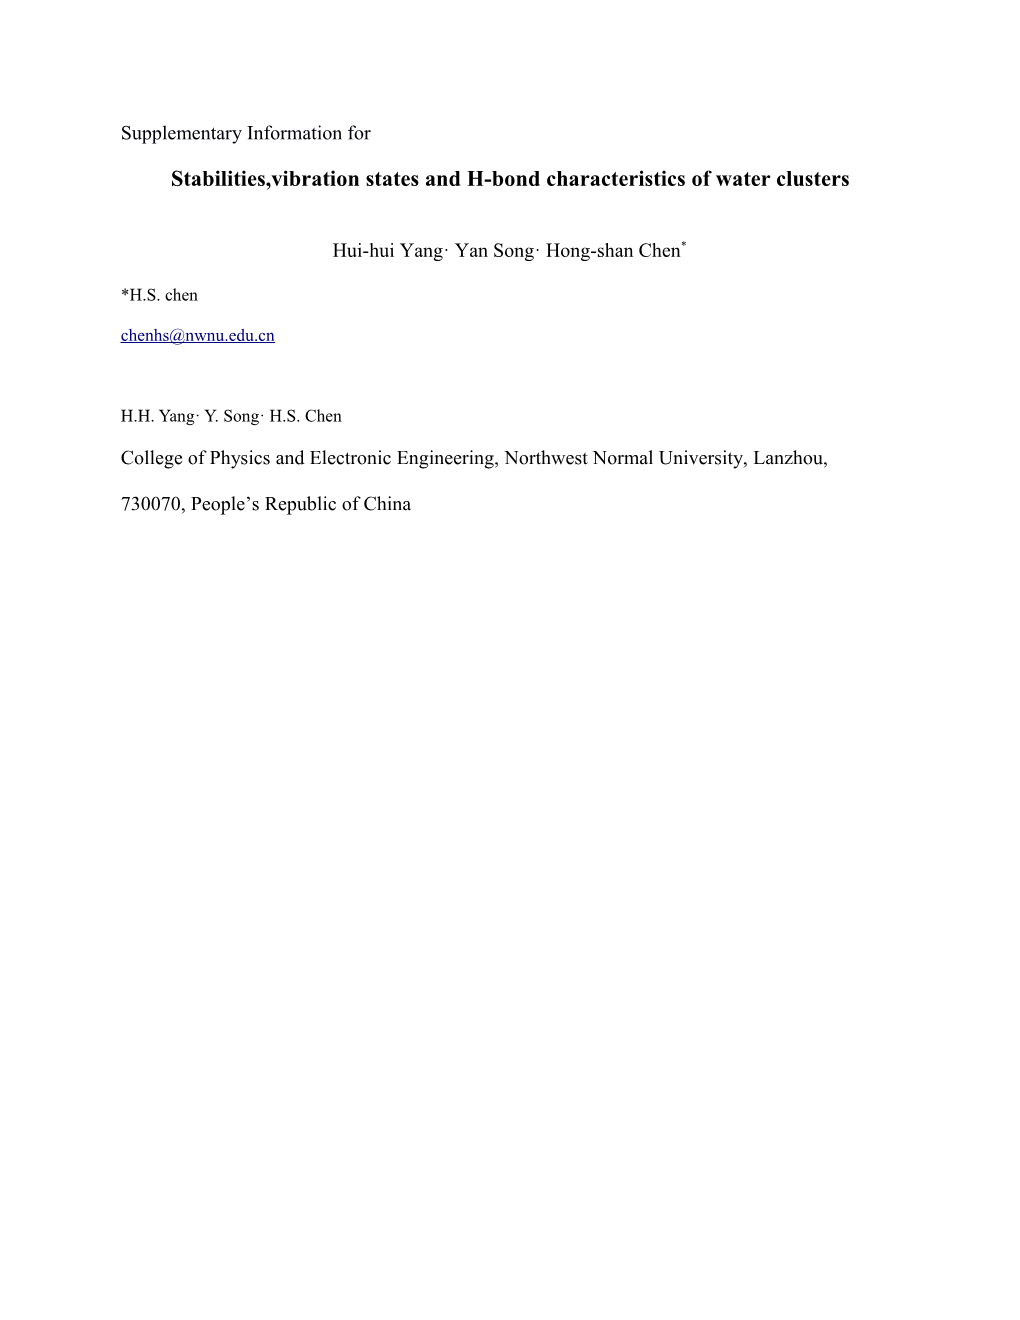 Stabilities,Vibration States and H-Bond Characteristics of Water Clusters